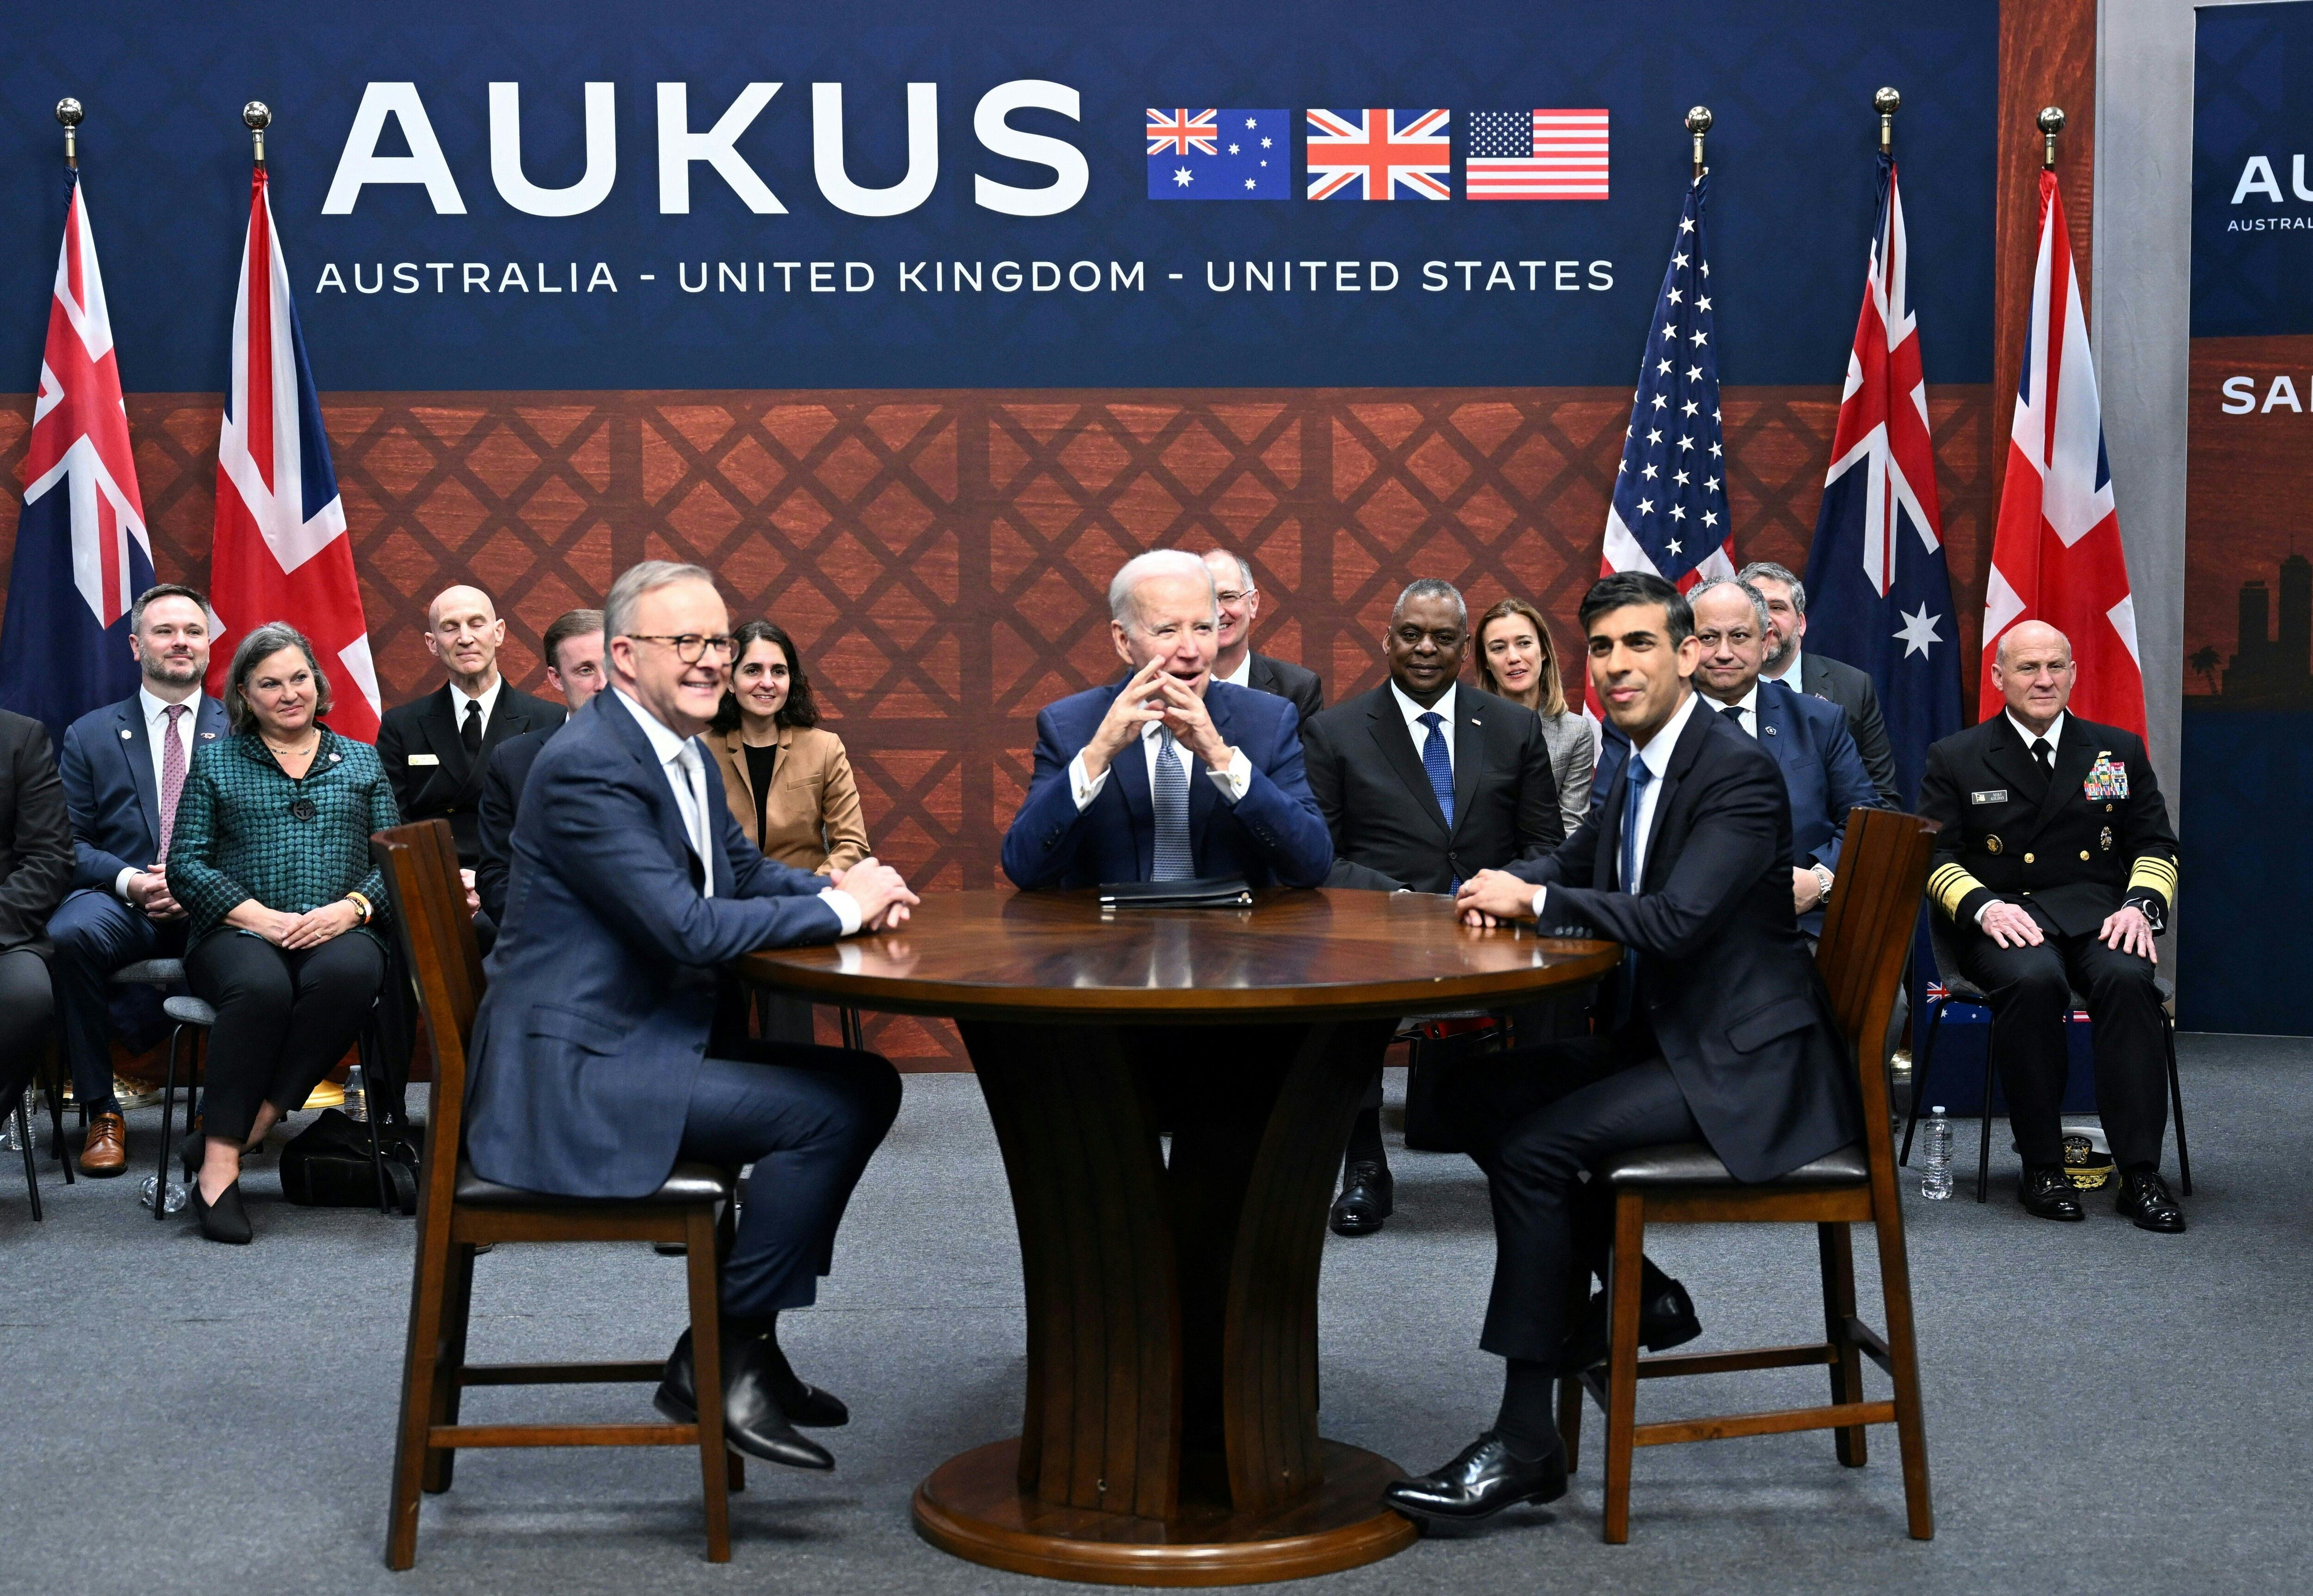 U.S. President Joe Biden (center) meets with British Prime Minister Rishi Sunak (right) and Australian Prime Minister Anthony Albanese during the AUKUS summit on March 13, 2023. (Photo by Jim WATSON / AFP).